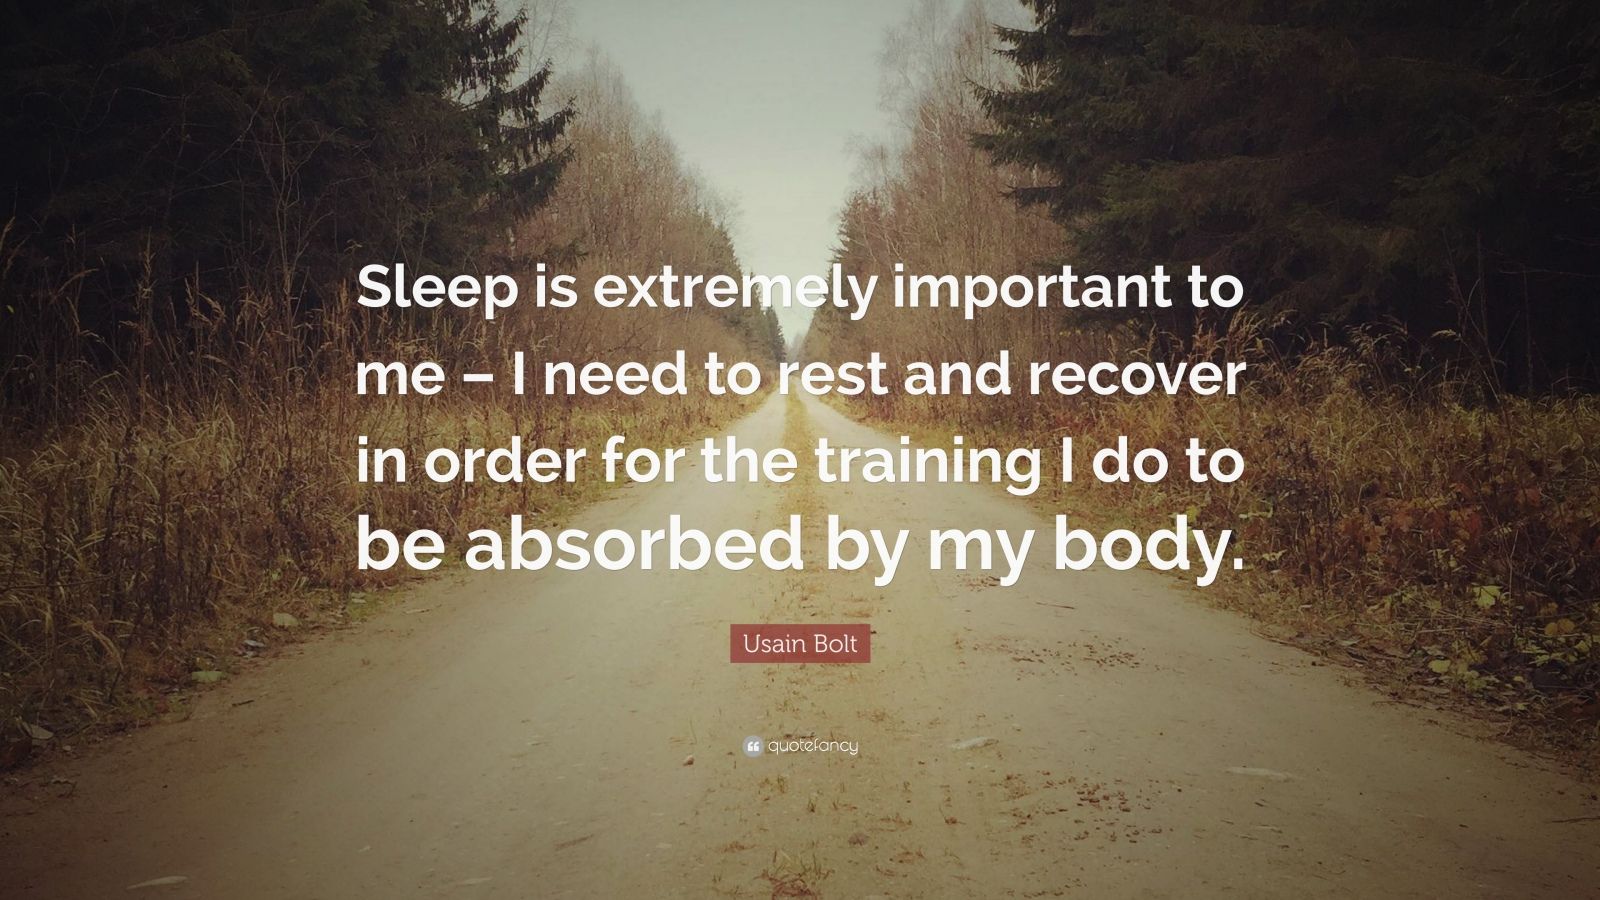 Usain Bolt Quote: “Sleep is extremely important to me – I need to rest